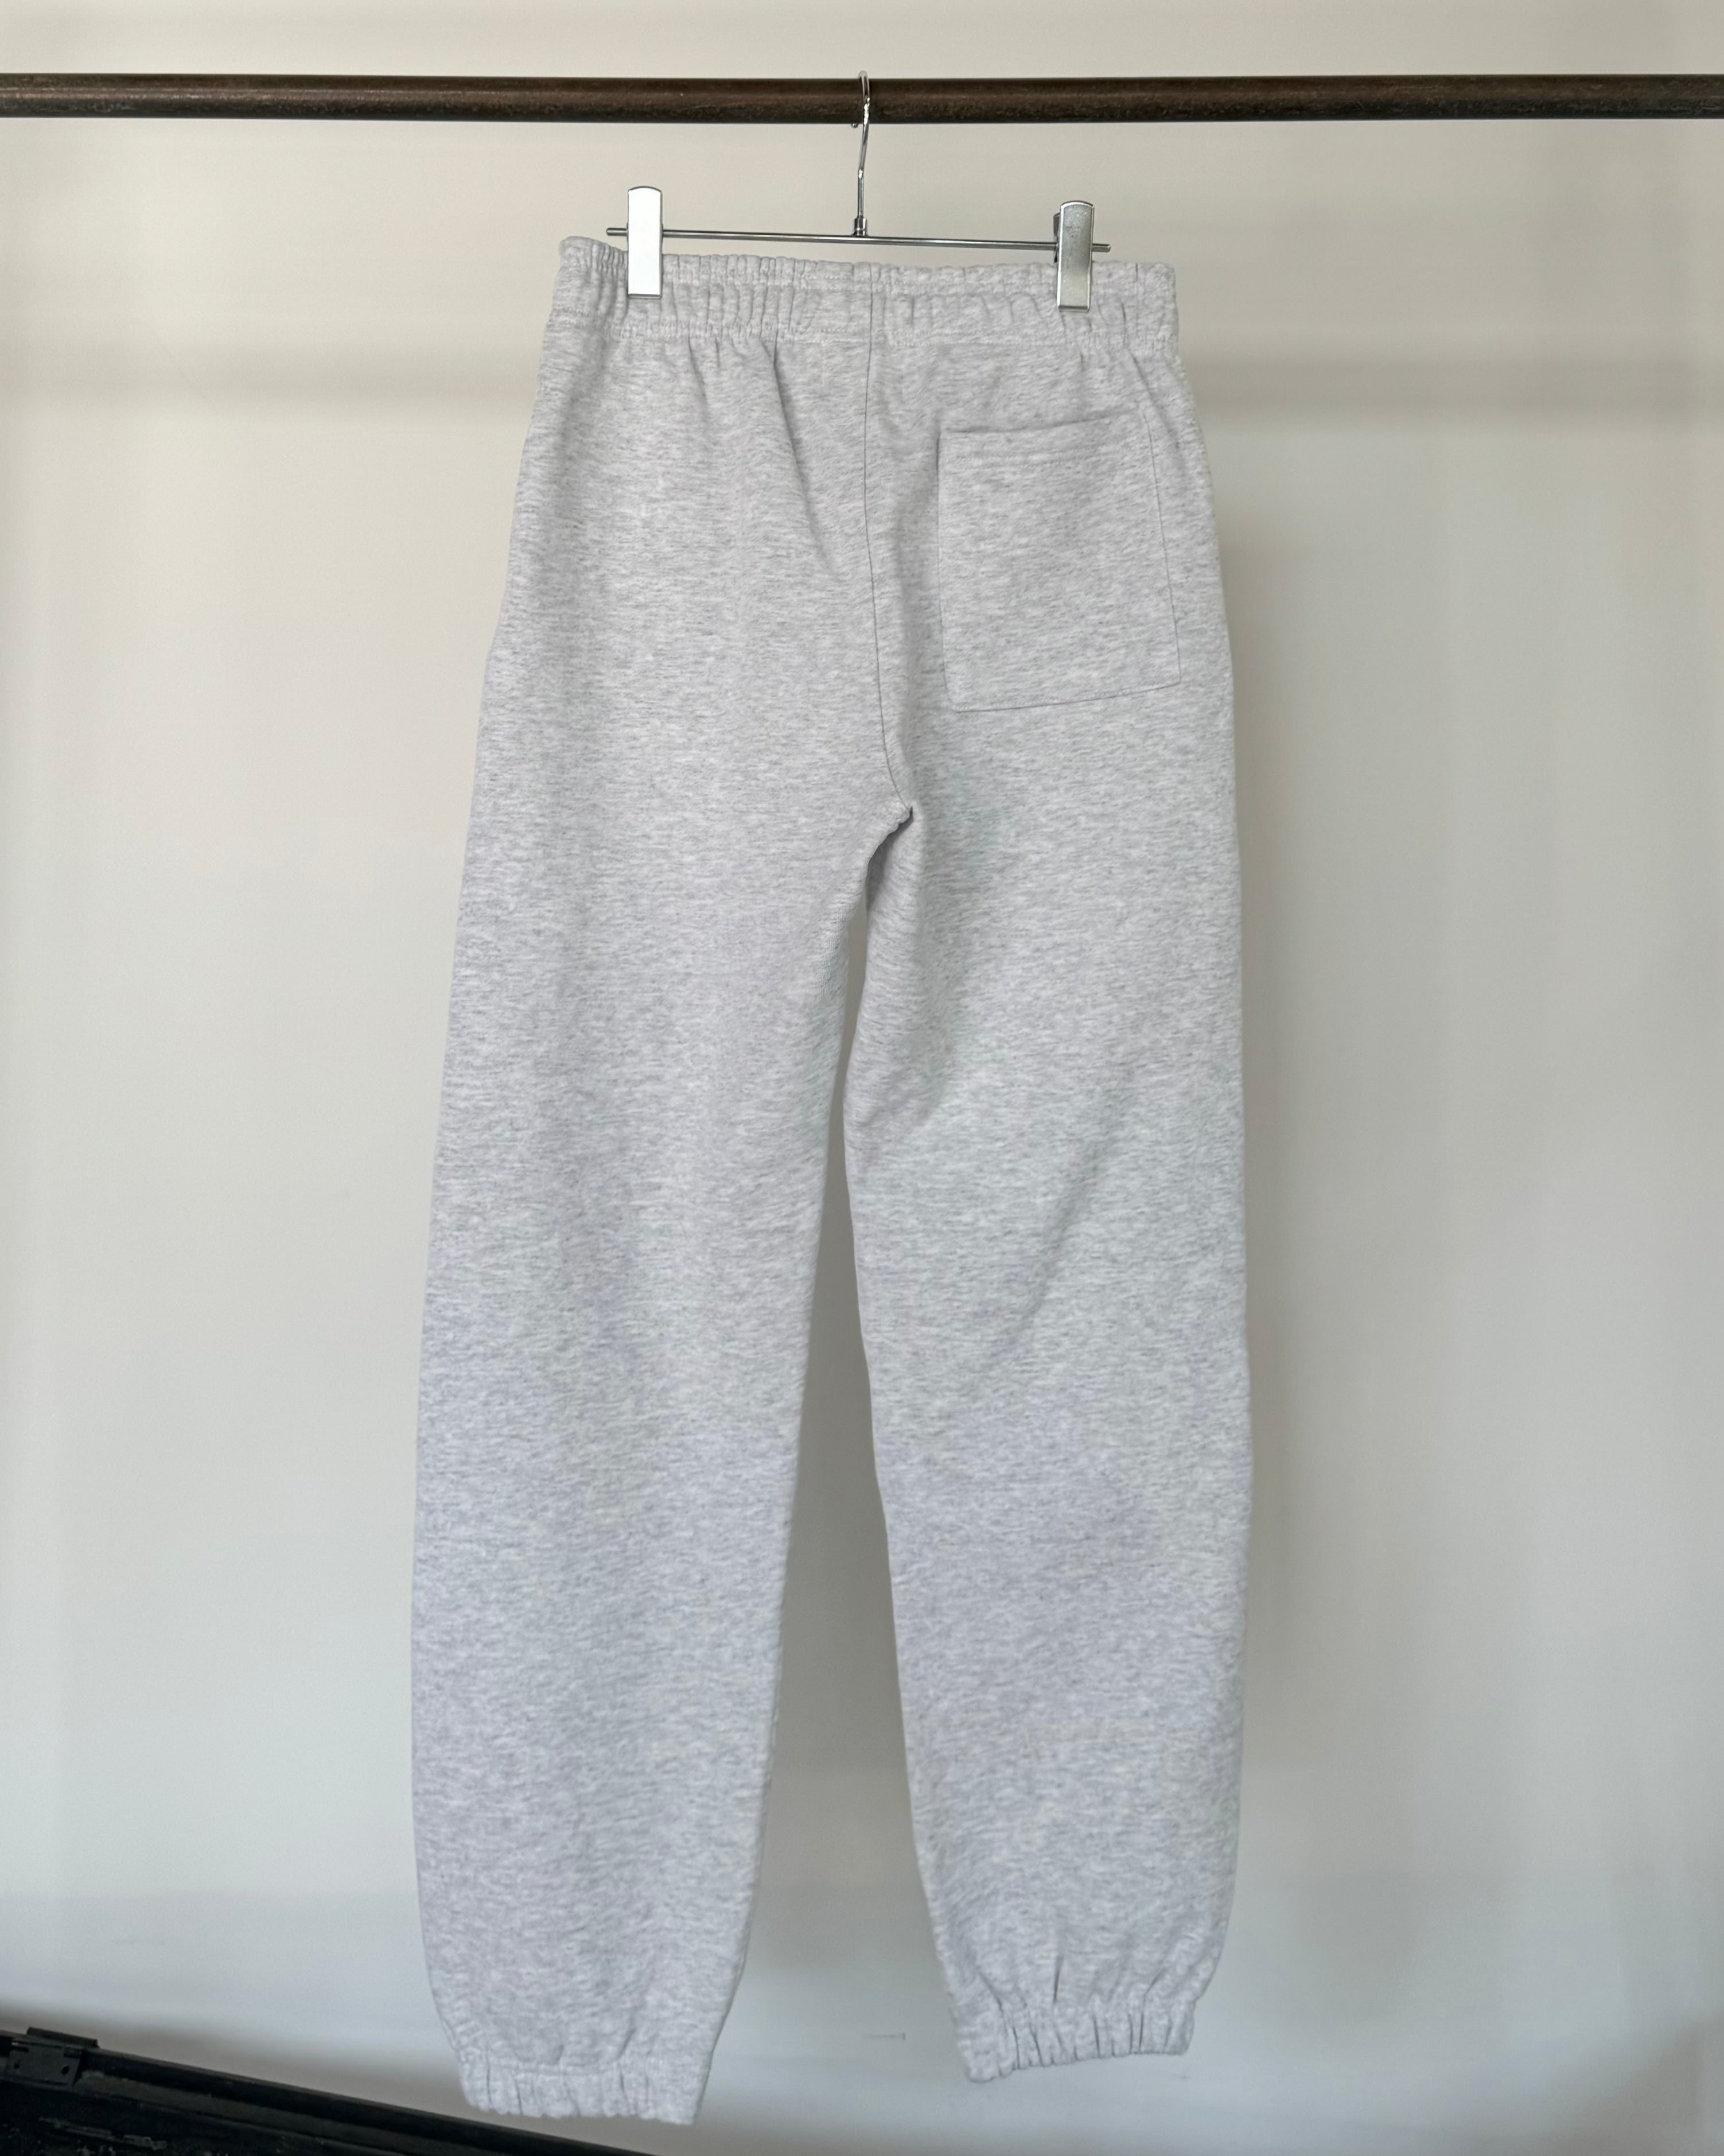 TODAY edition / MY PACE #01 Sweat Pants - GRAY